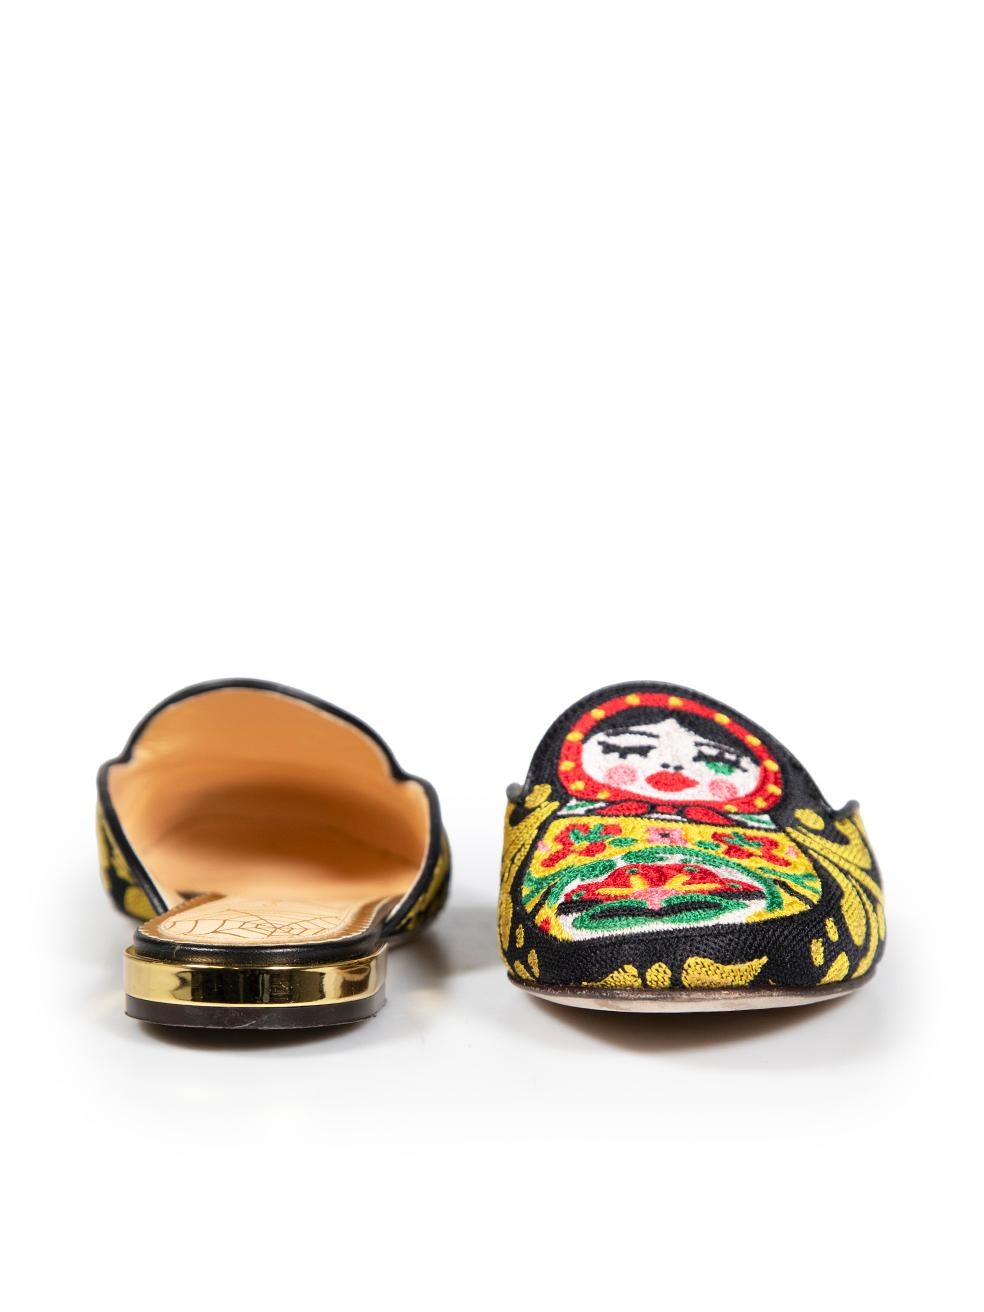 Charlotte Olympia Matryoshka Slipper Mules Size IT 36 In Good Condition For Sale In London, GB